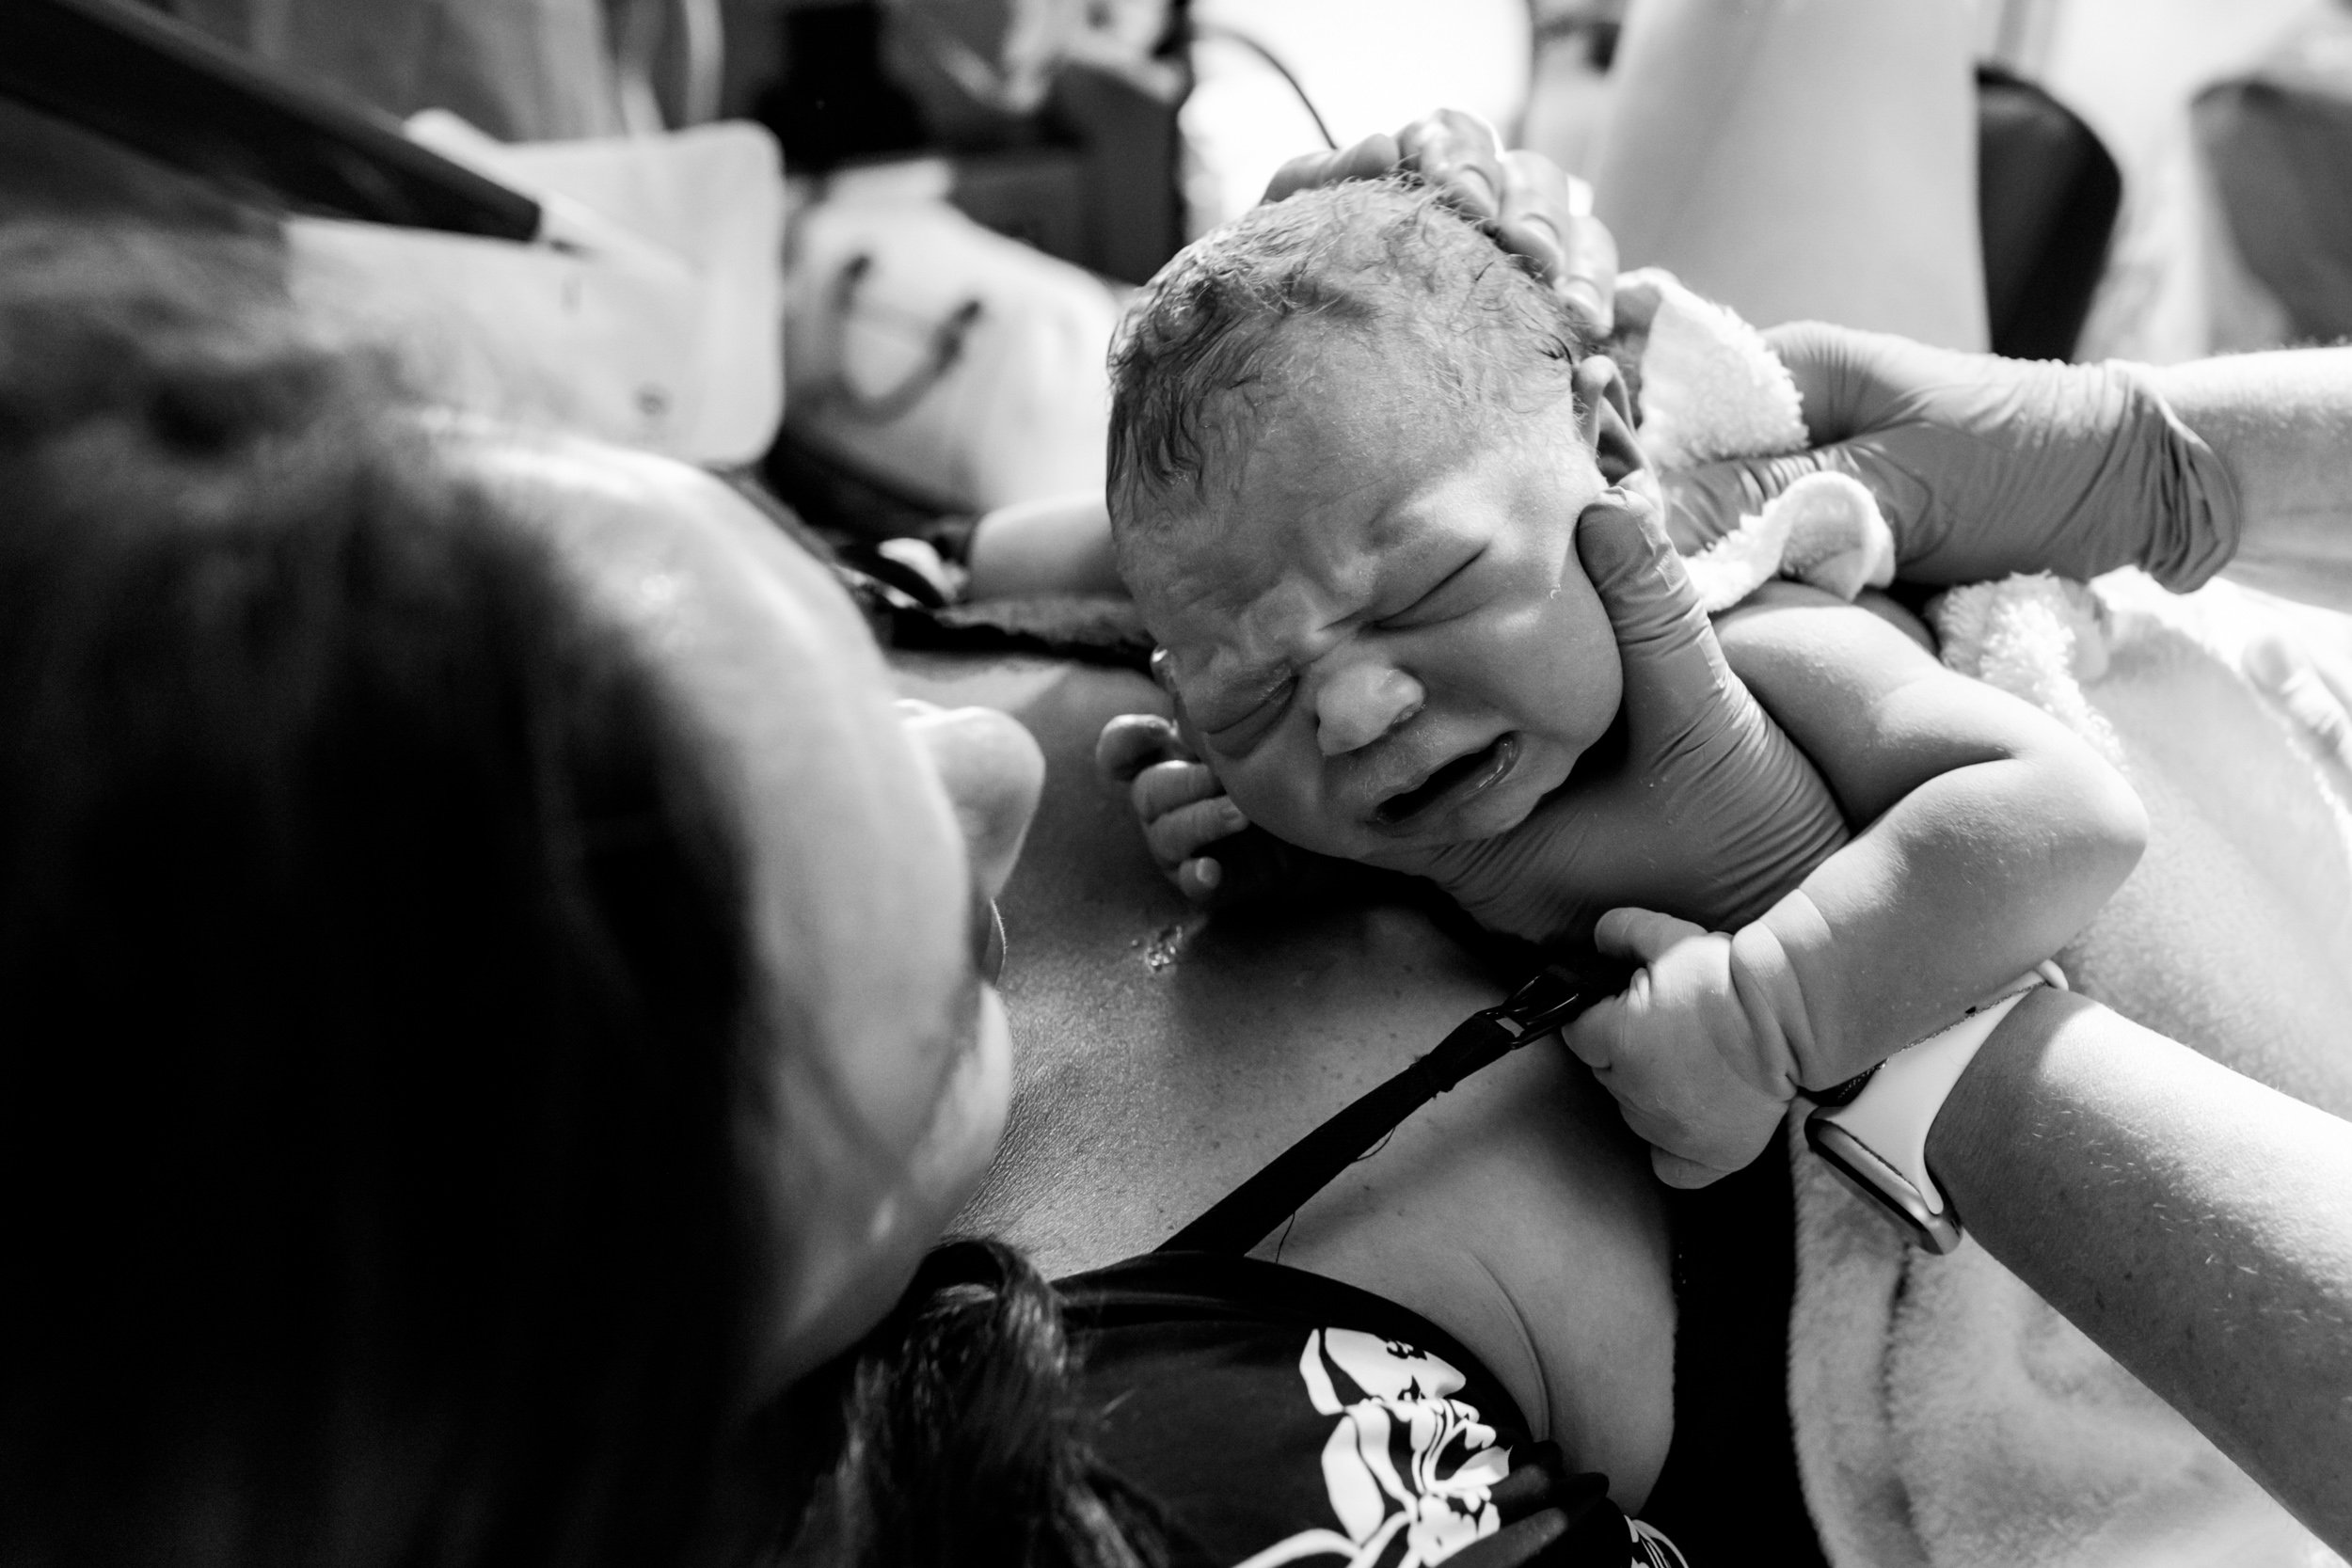 newborn baby being placed on his mother's chest for skin-to-skin